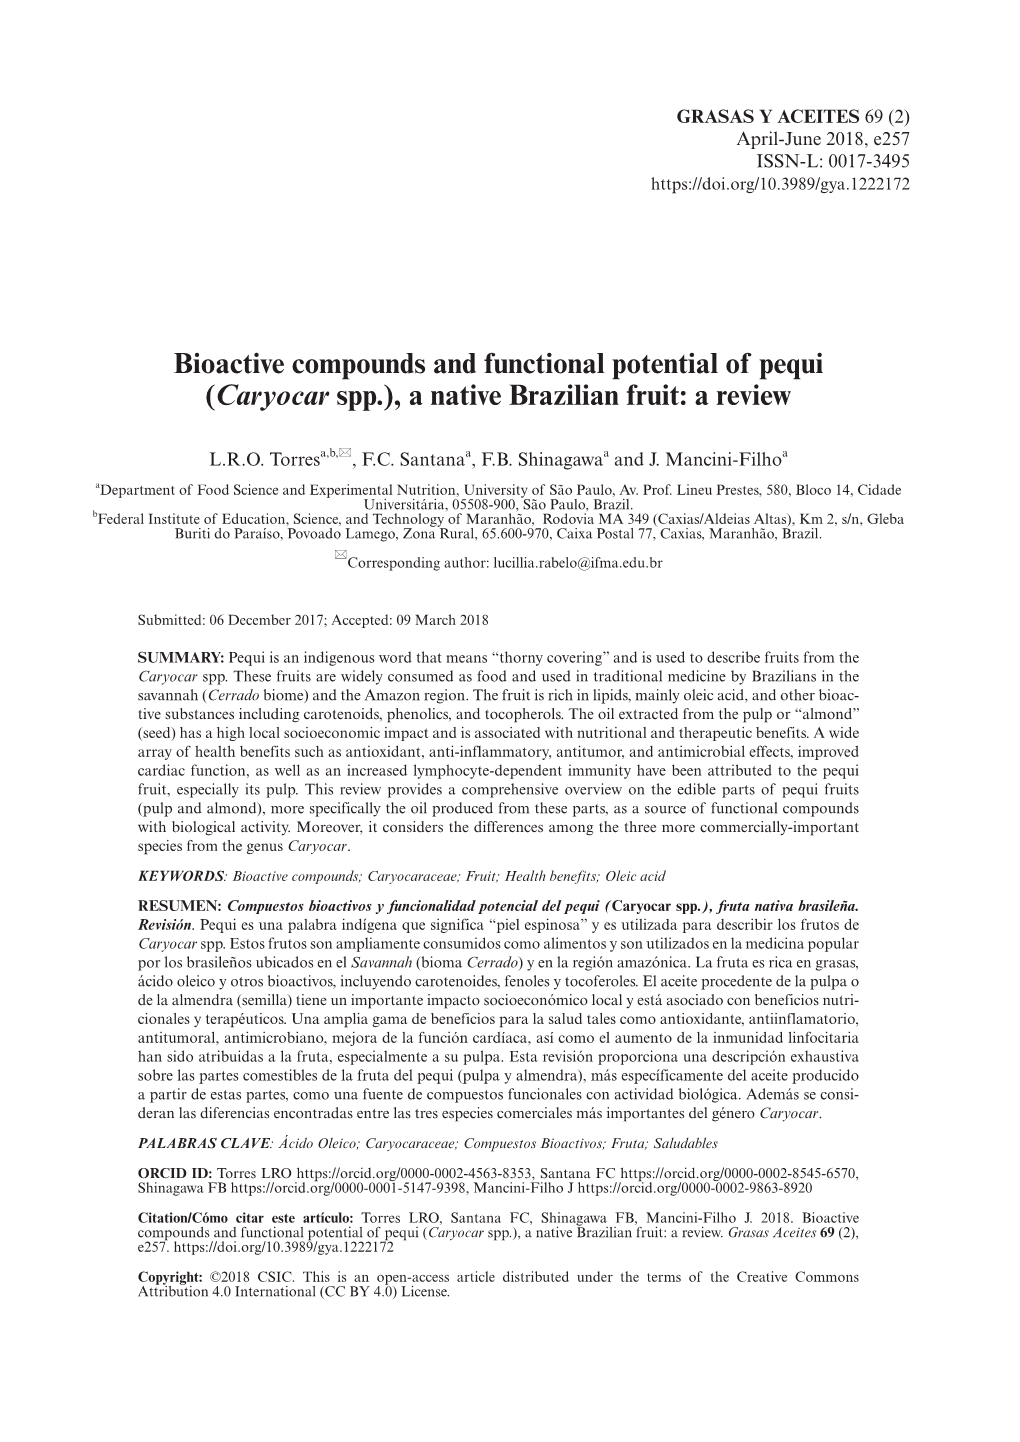 Bioactive Compounds and Functional Potential of Pequi (Caryocar Spp.), a Native Brazilian Fruit: a Review